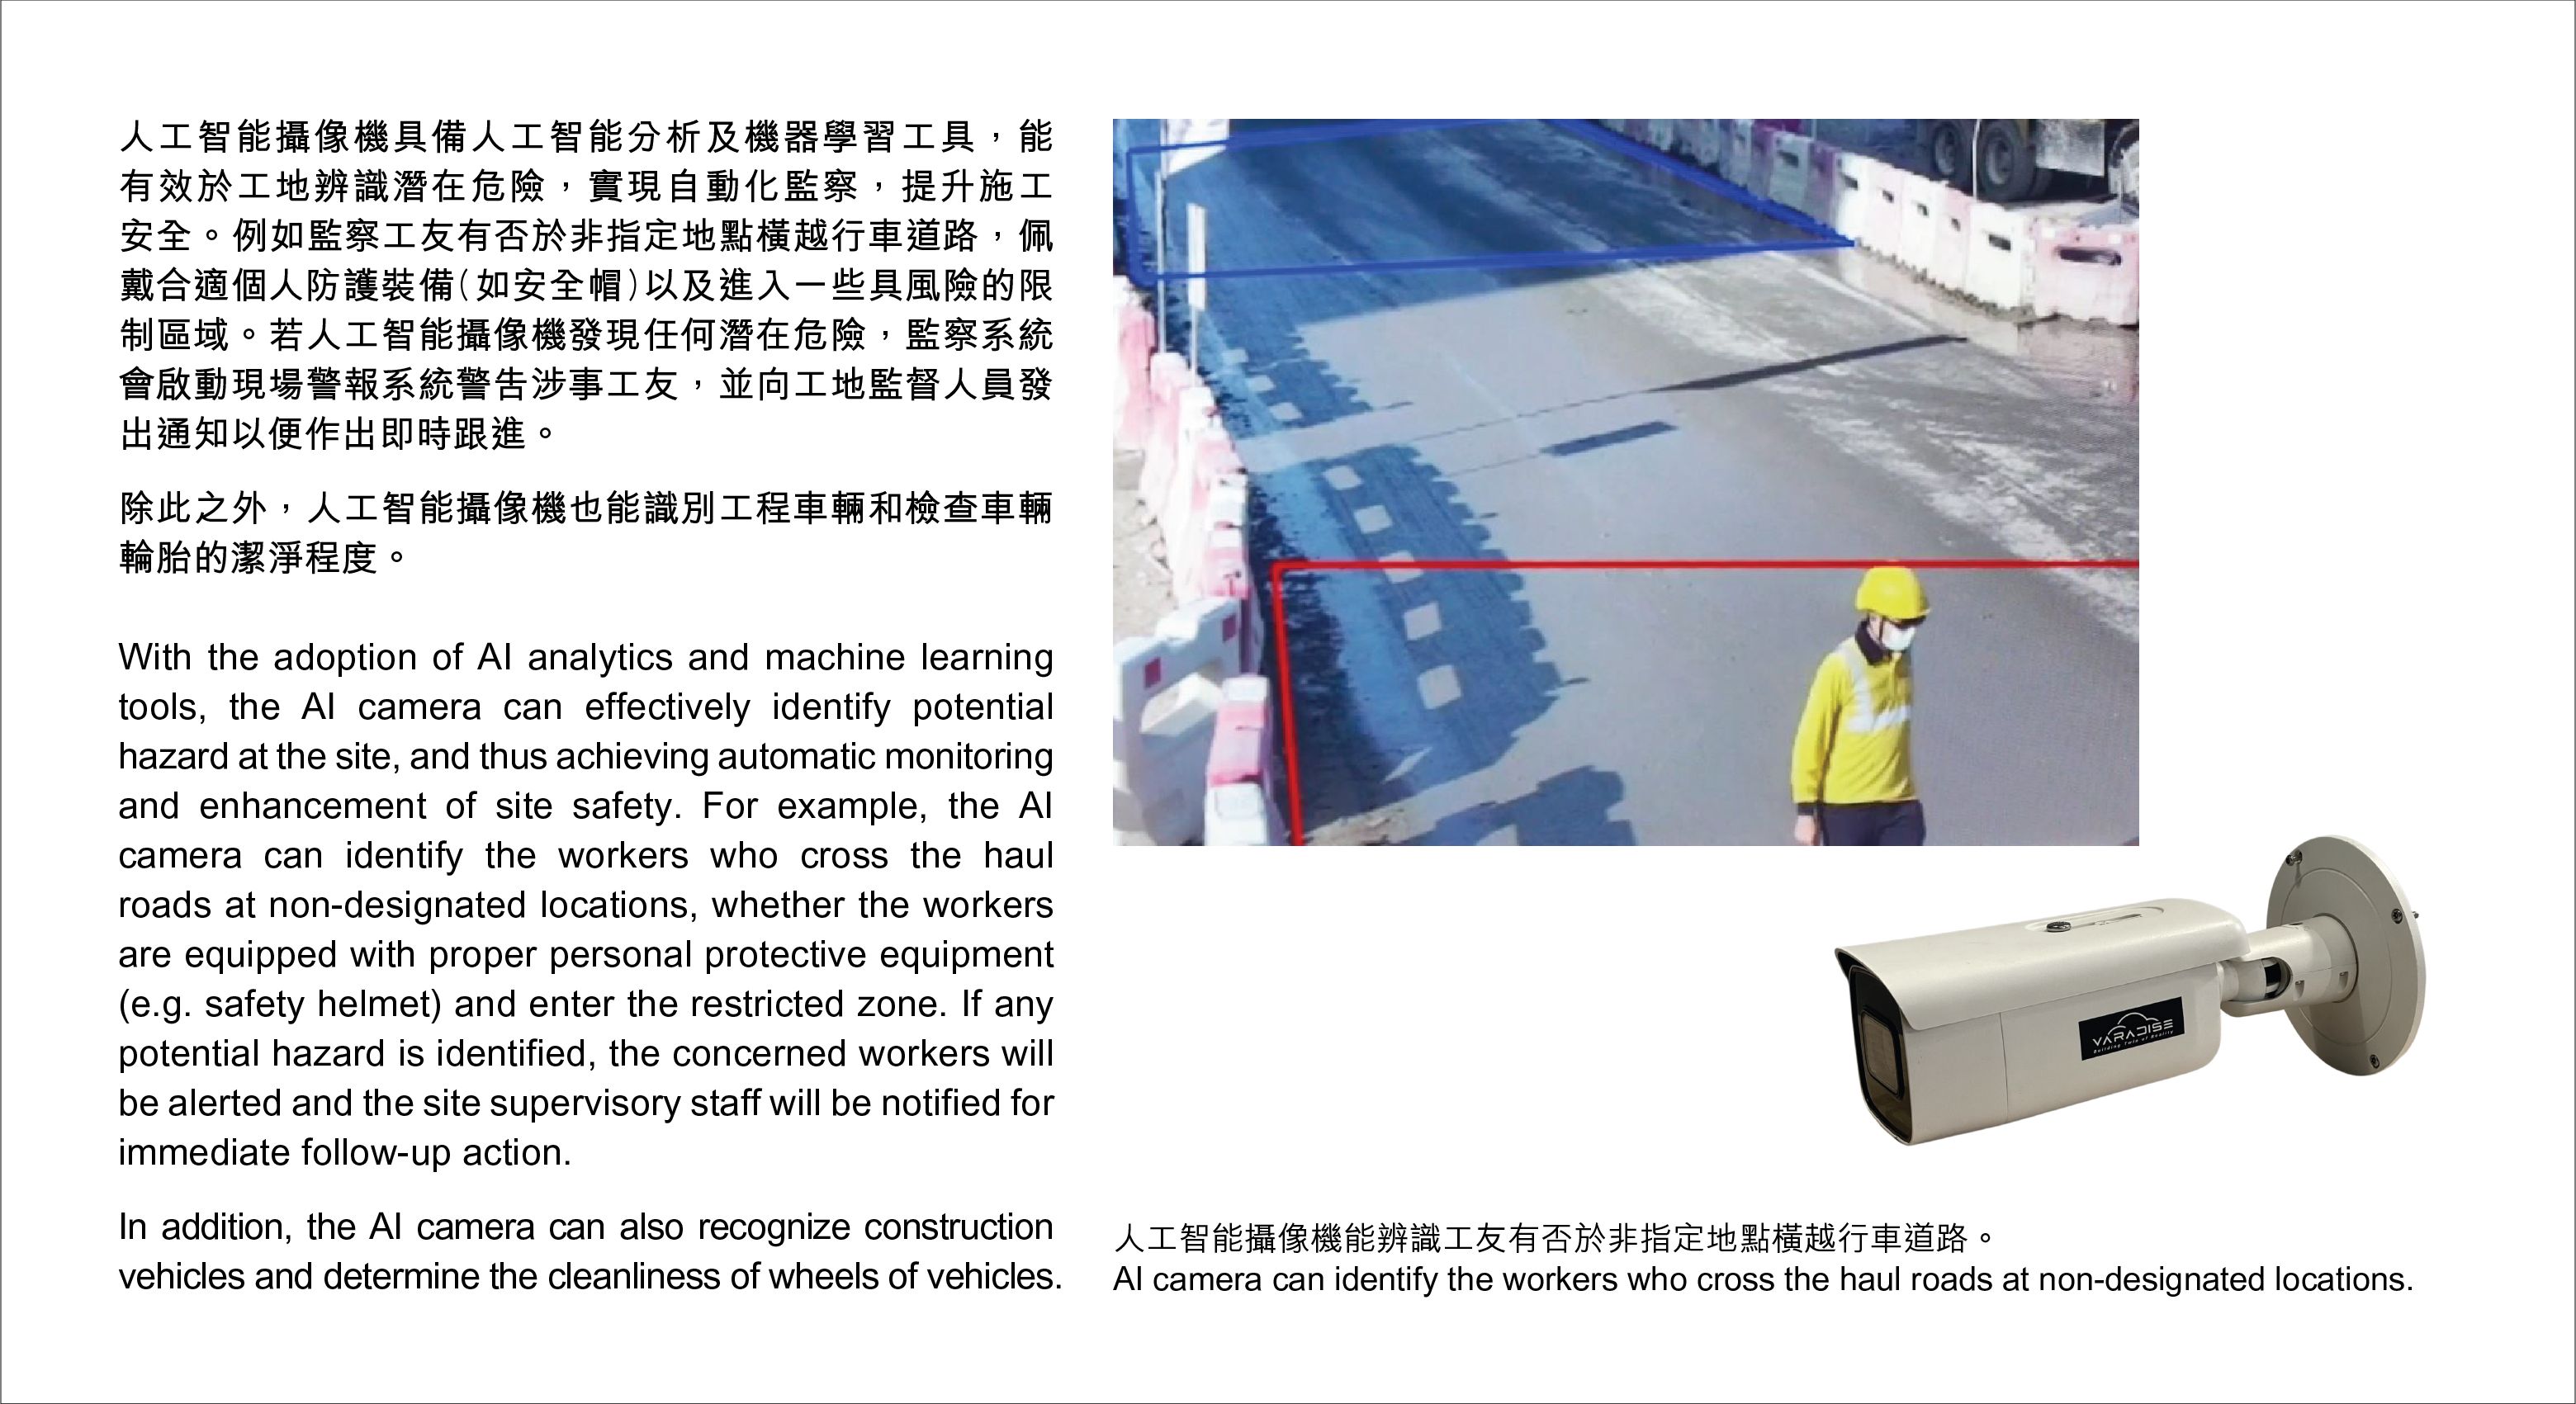 With the adoption of AI analytics and machine learning tools, the AI camera can effectively identify potential  hazard at the site, and thus achieving automatic monitoring and enhancement of site safety. For example, the AI camera can identify the workers who cross the haul roads at non-designated locations, whether the workers are equipped with proper personal protective equipment (e.g. safety helmet) and enter the restricted zone. If any potential hazard is identified, the concerned workers will be alerted and the site supervisory staff will be notified for immediate follow-up action. In addition, the AI camera can also recognize construction vehicles and determine the cleanliness of wheels of vehicles.